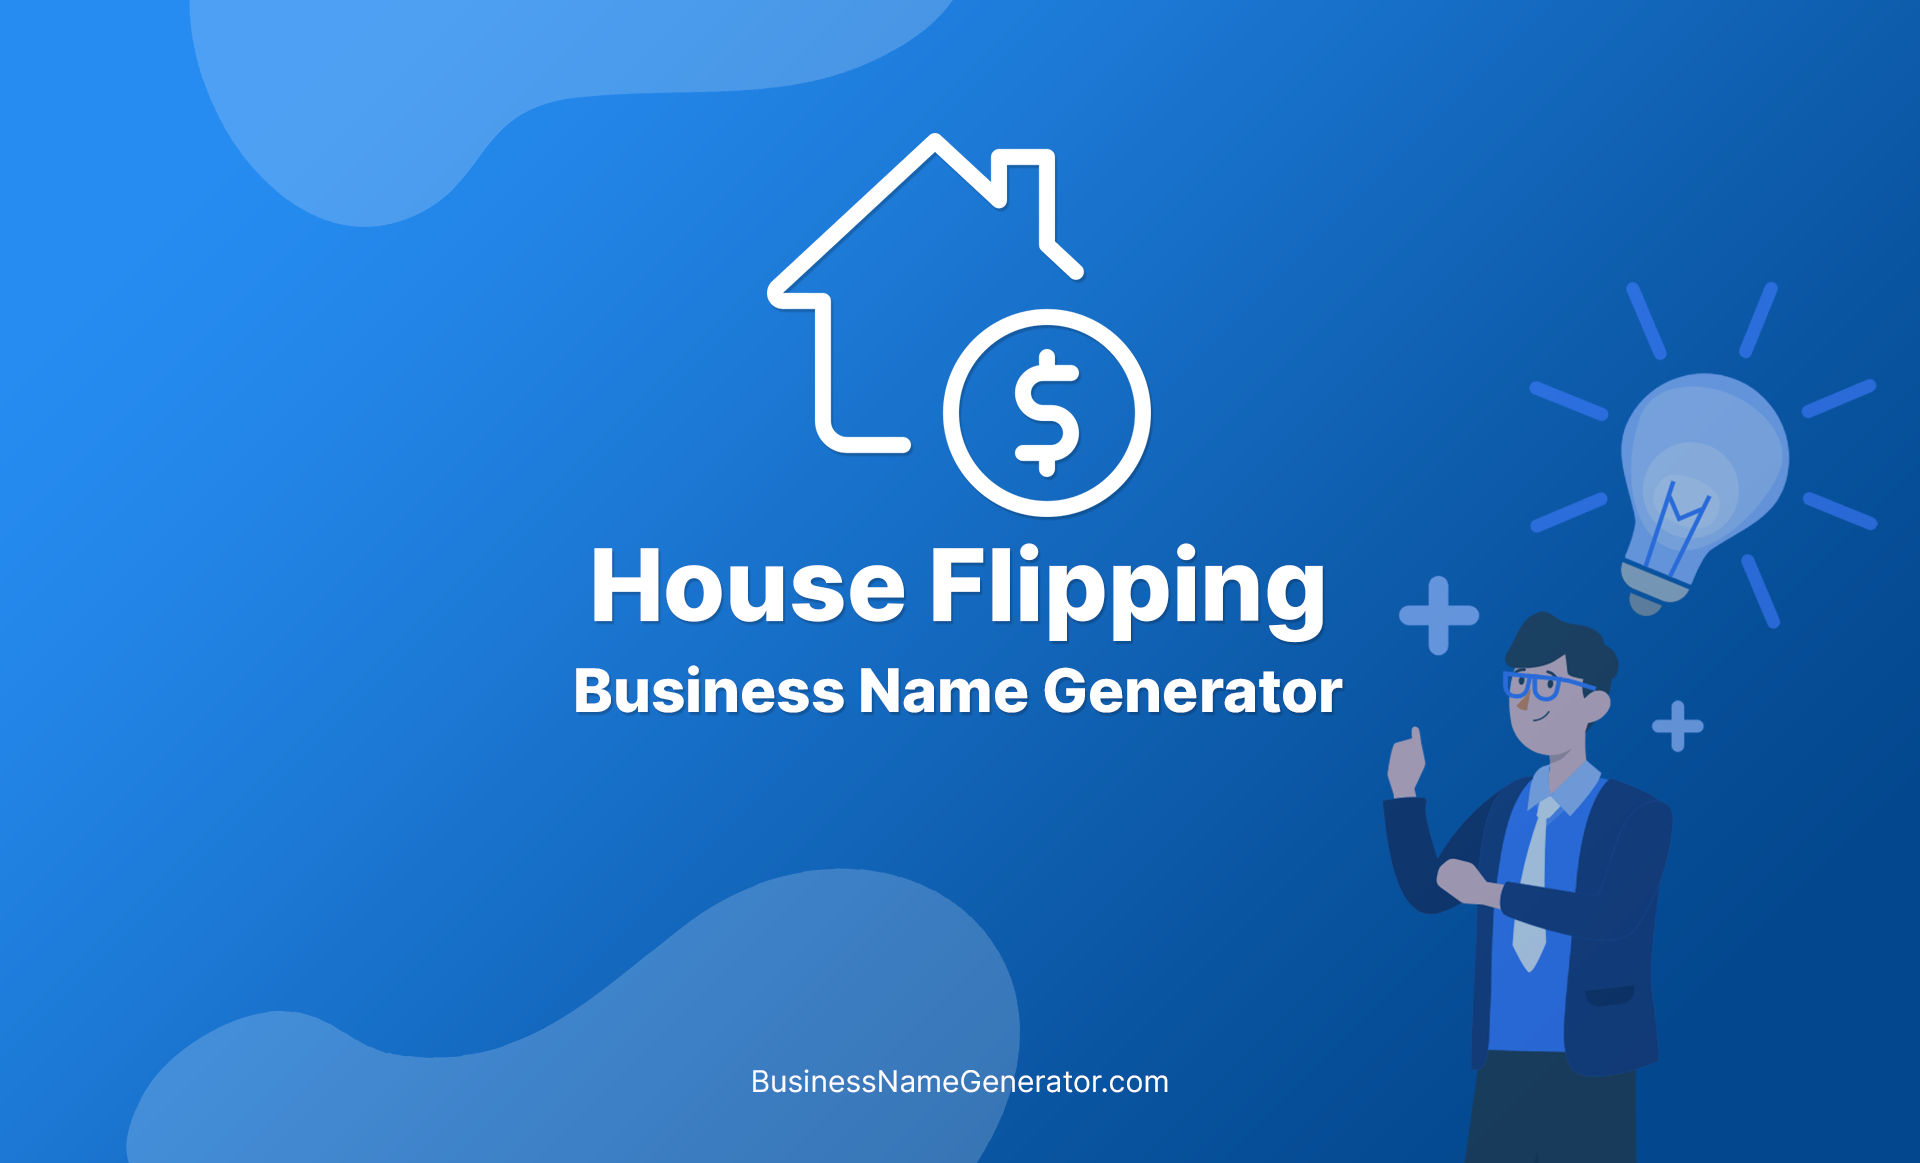 House Flipping Business Name Generator